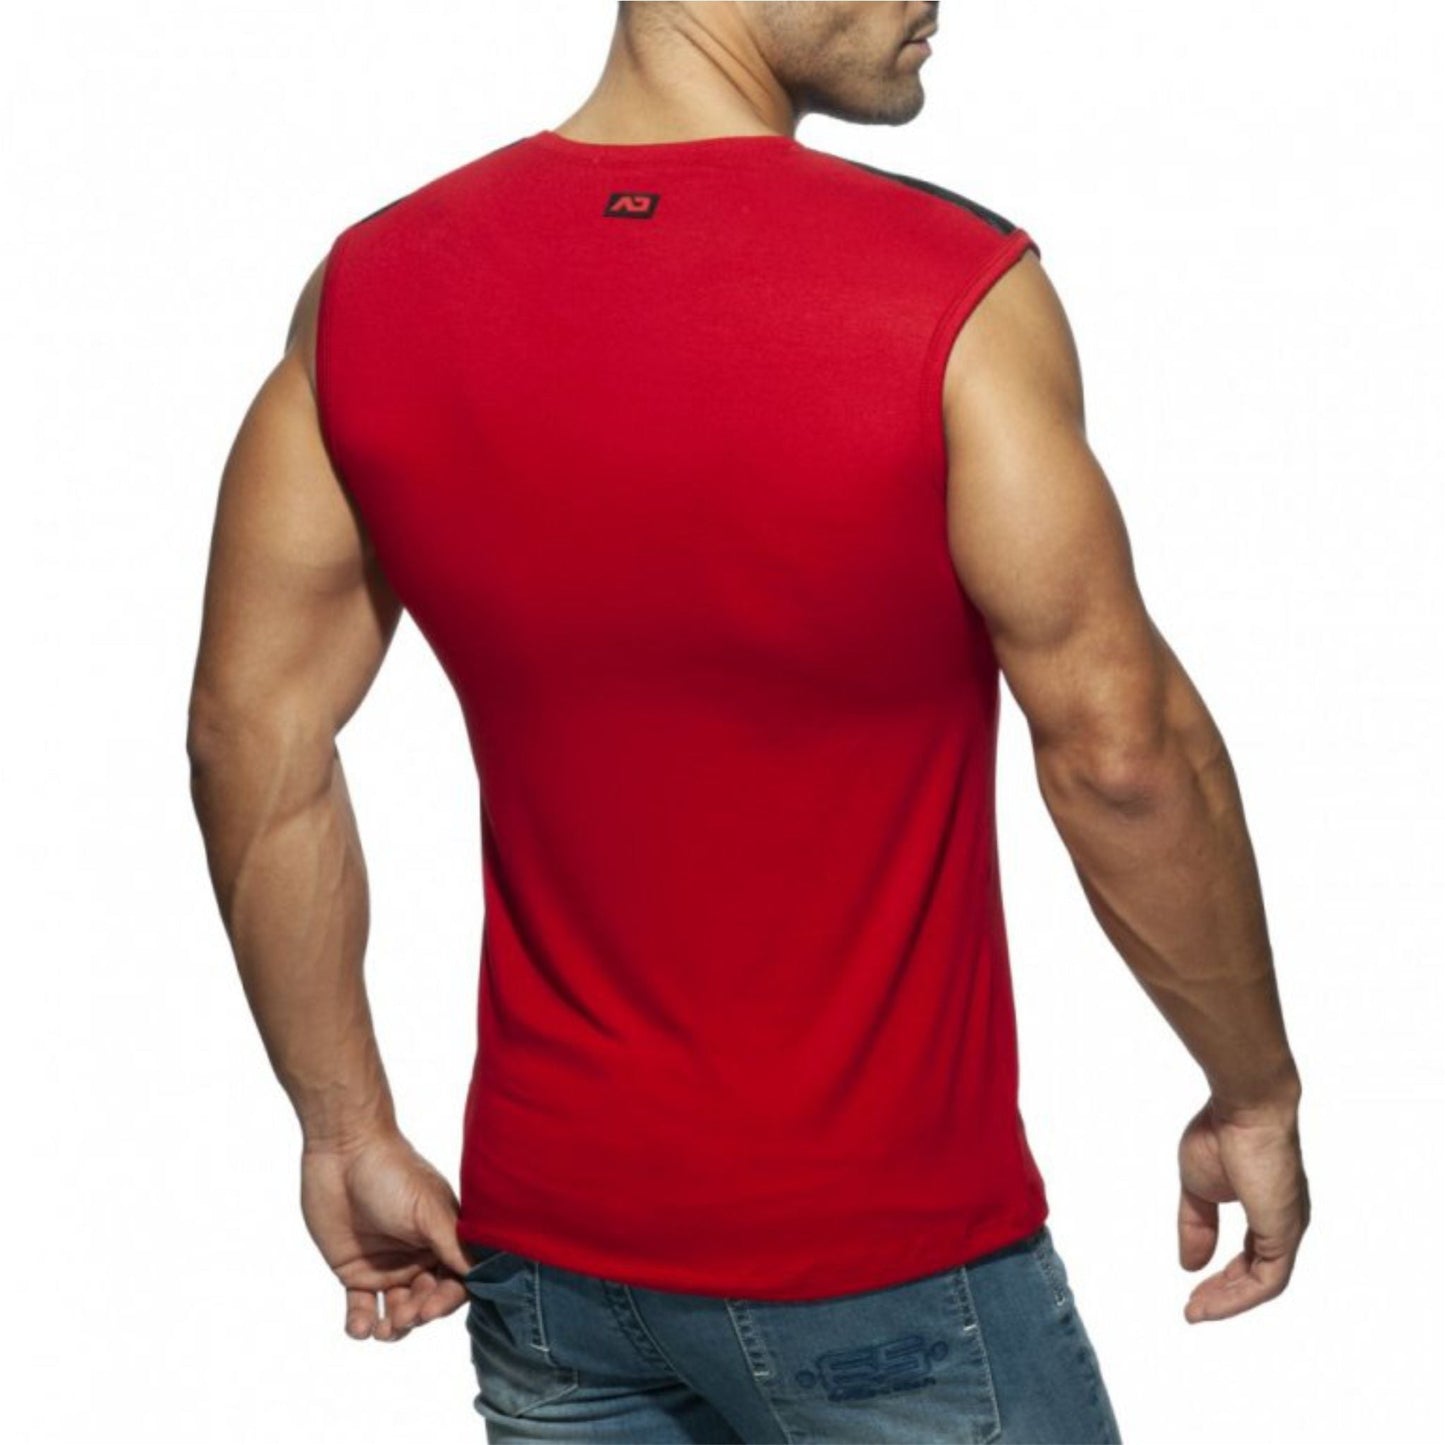 ADDICTED ARMY COMBI TANK TOP - RED